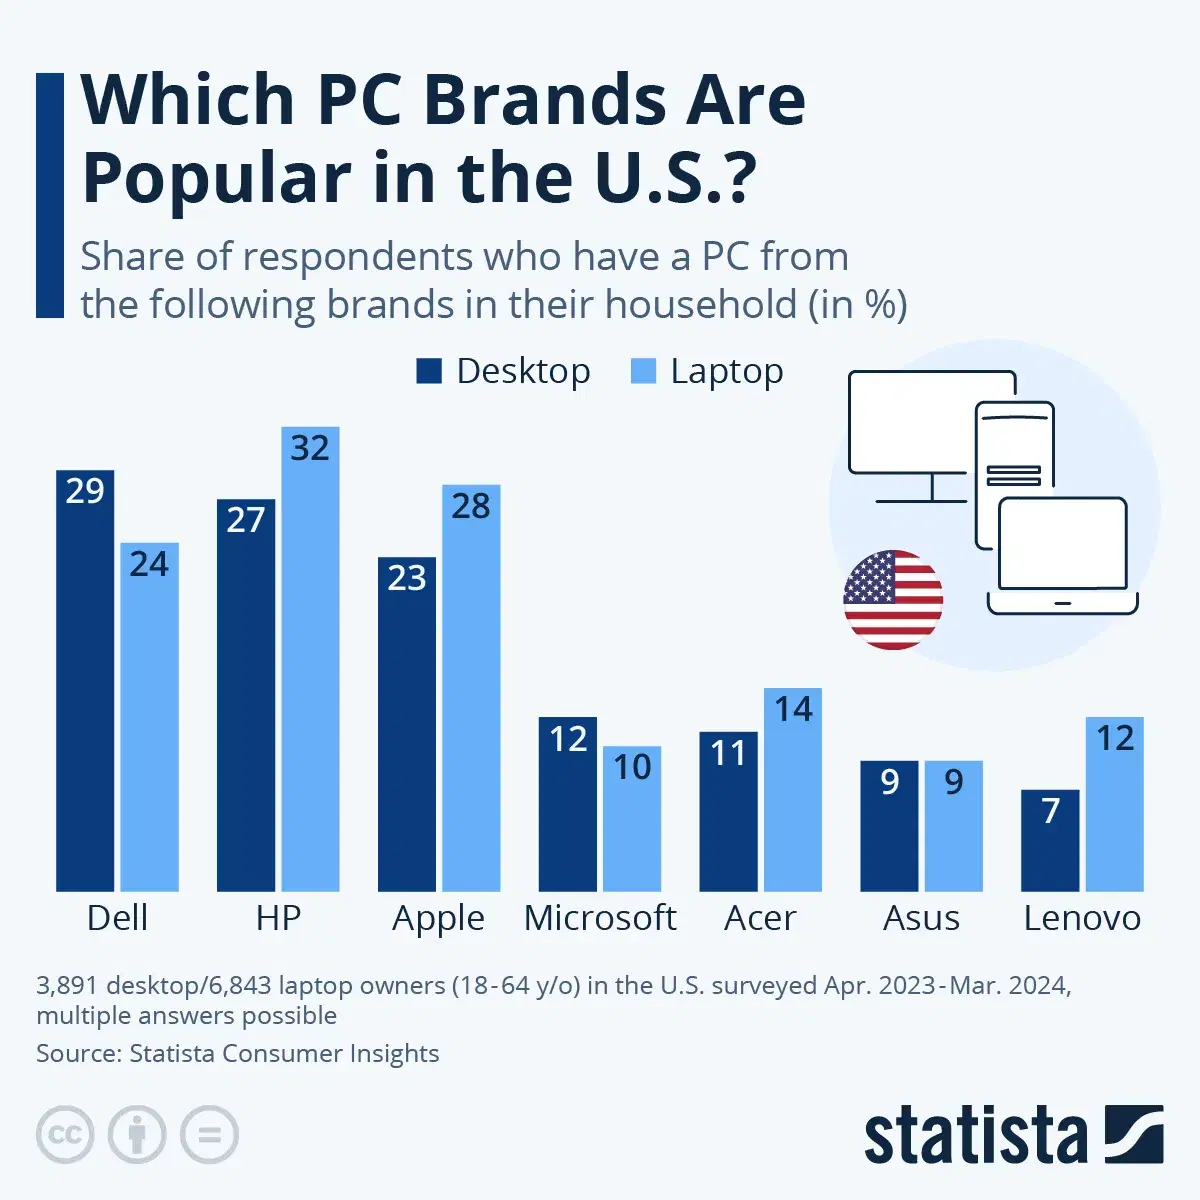 Which PC Brands Are Popular in the U.S.?